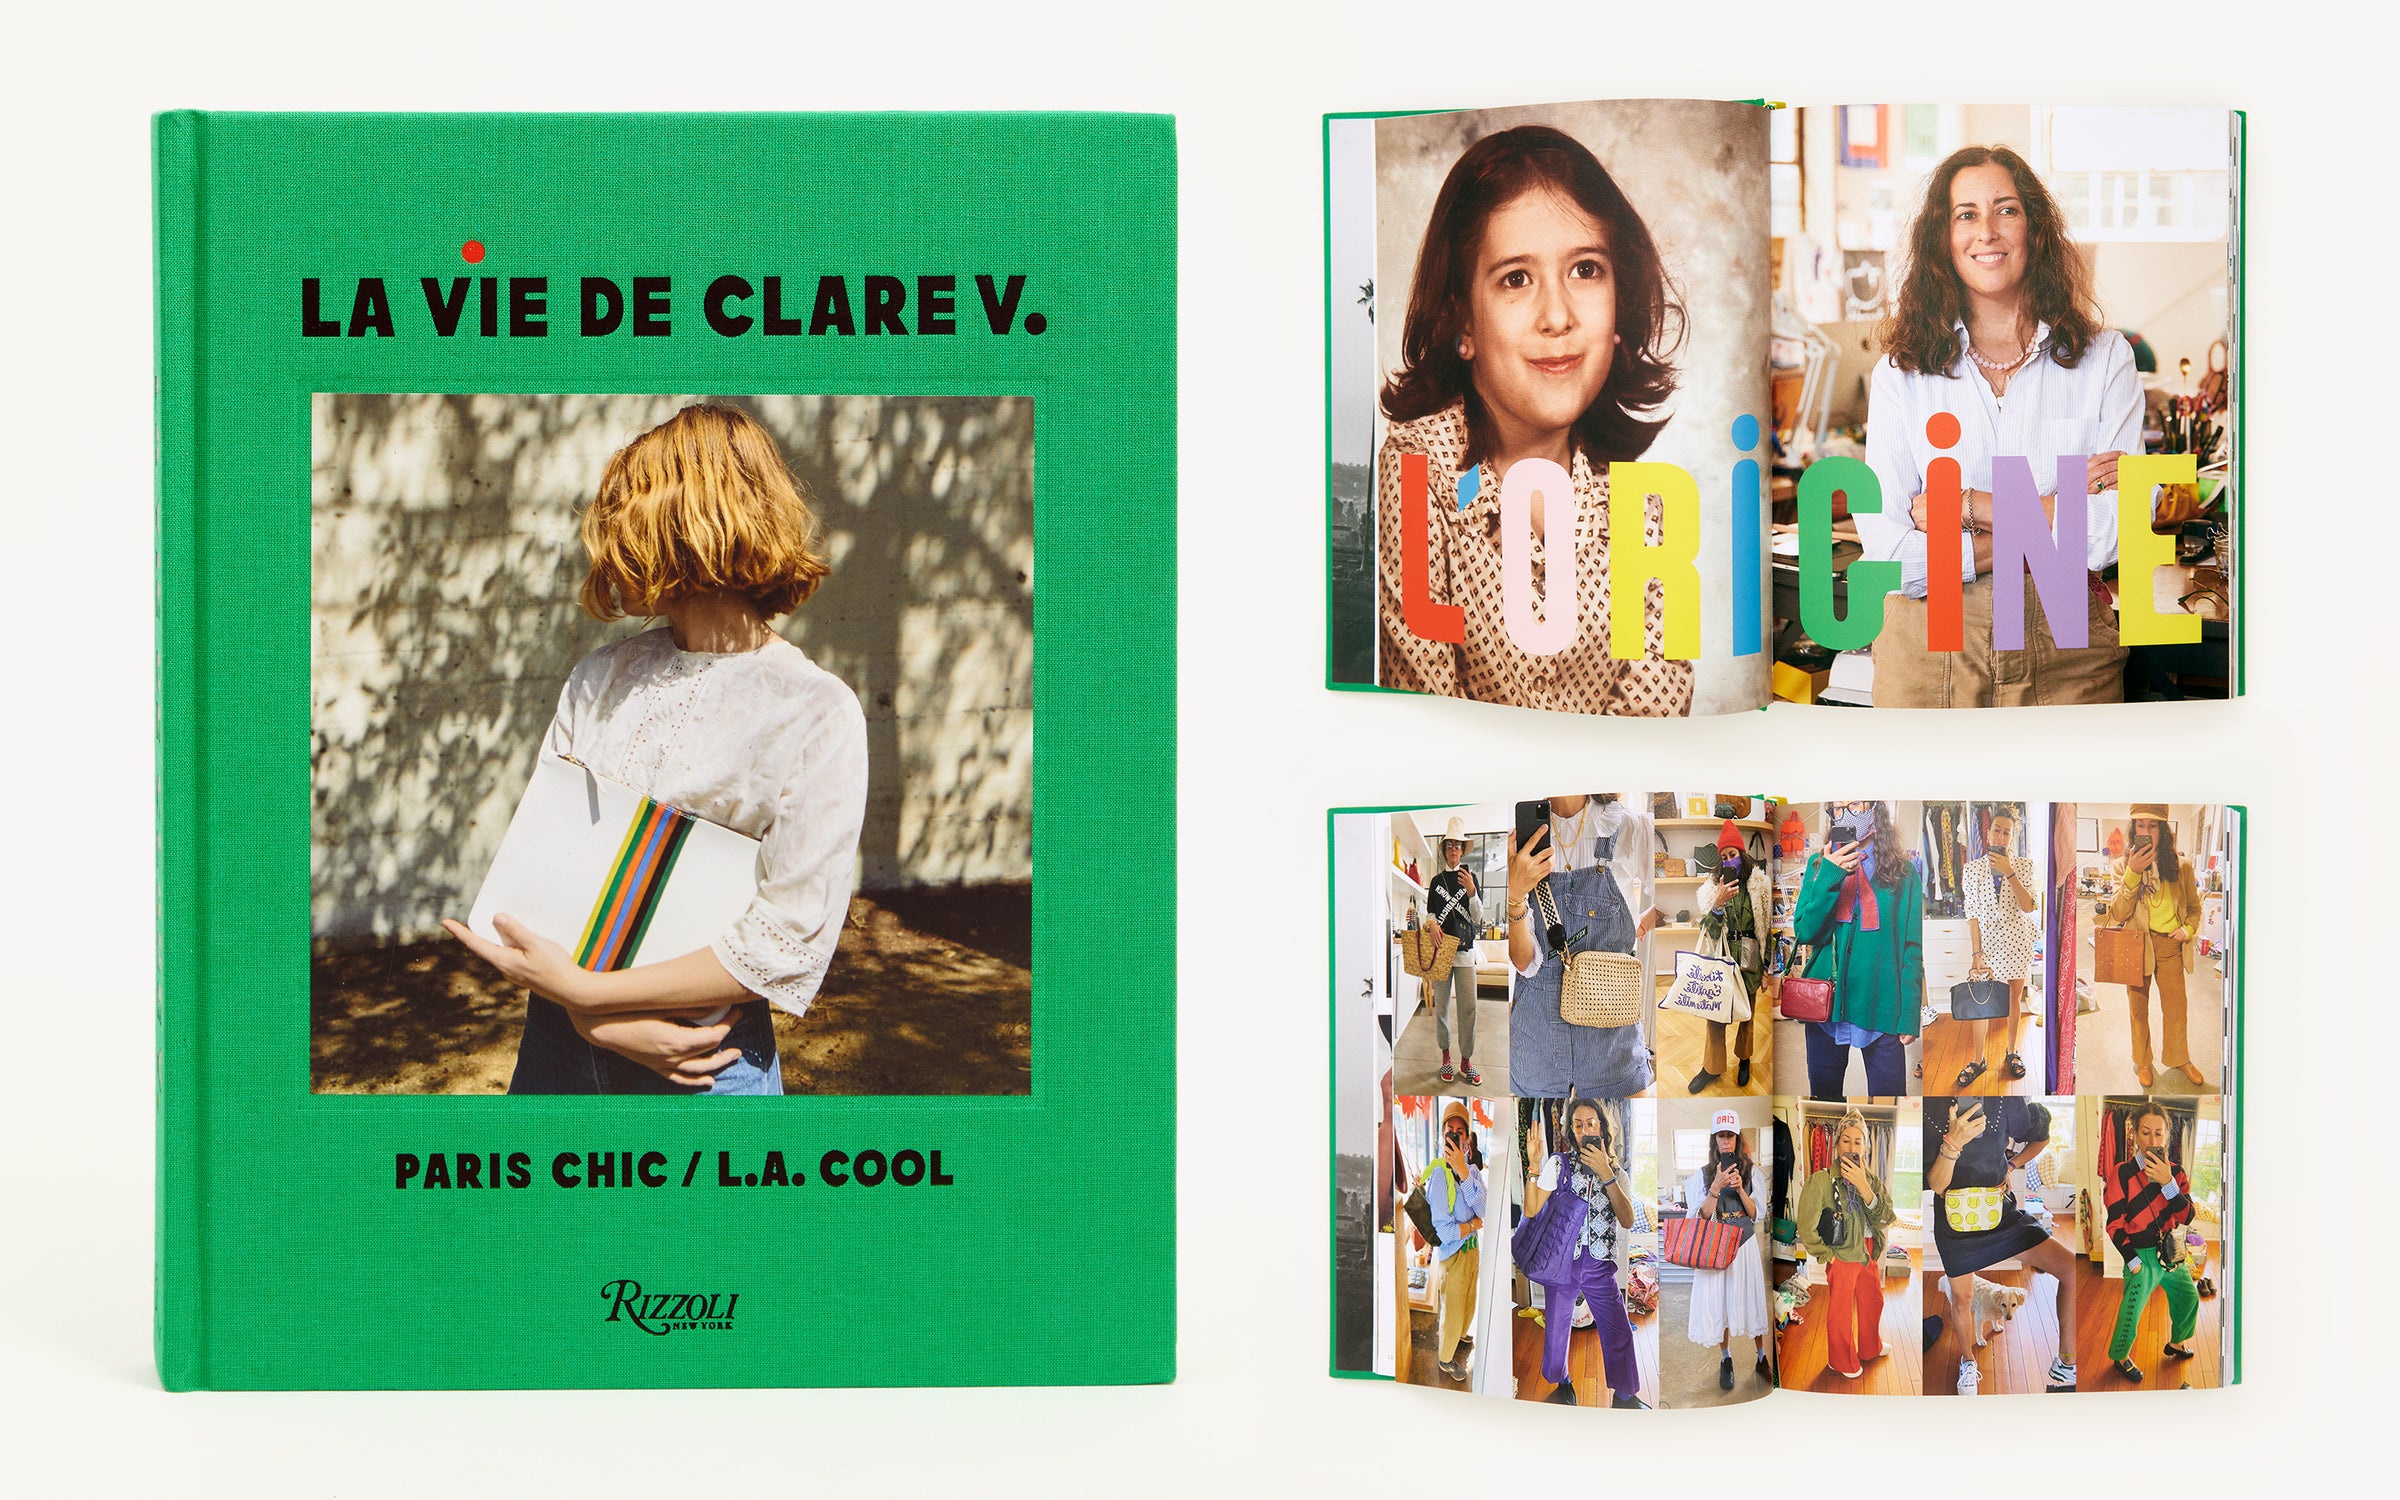 La Vie De Clare V. Book Cover on the left. On the right, there are two spreads of the inside of the book - one has the word L'origine and features a picture of Clare when she was a teen and a picture of her now, the other spread features a collage of Clare Vivier selfie mirror pics where she's carrying and wearing Clare V. bags and apparel. 